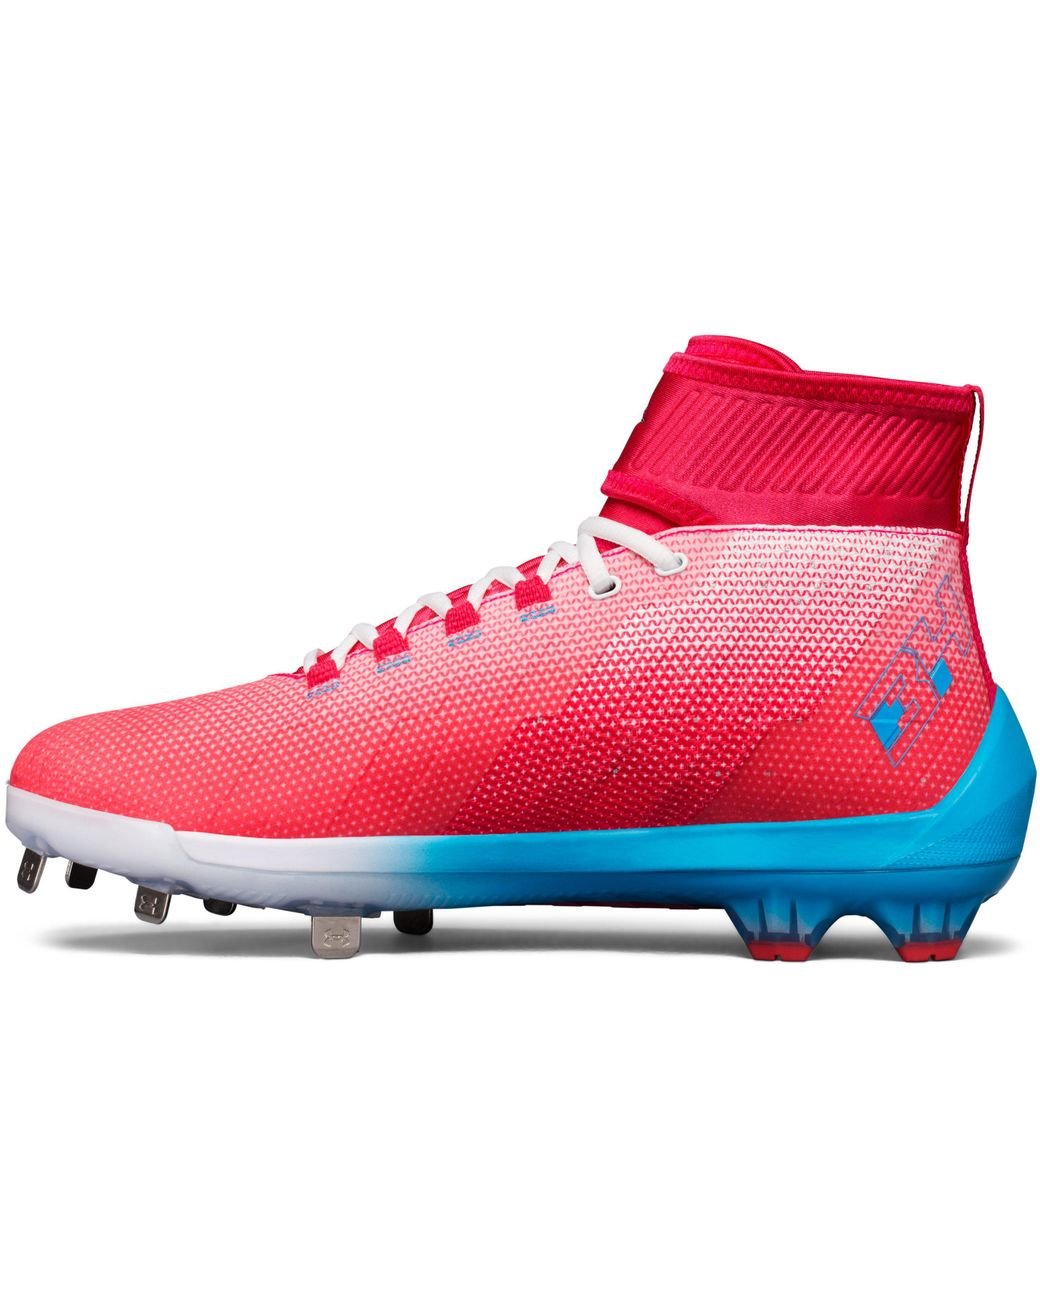 Under Armour Men's Ua Harper Two Mid St – Limited Edition 